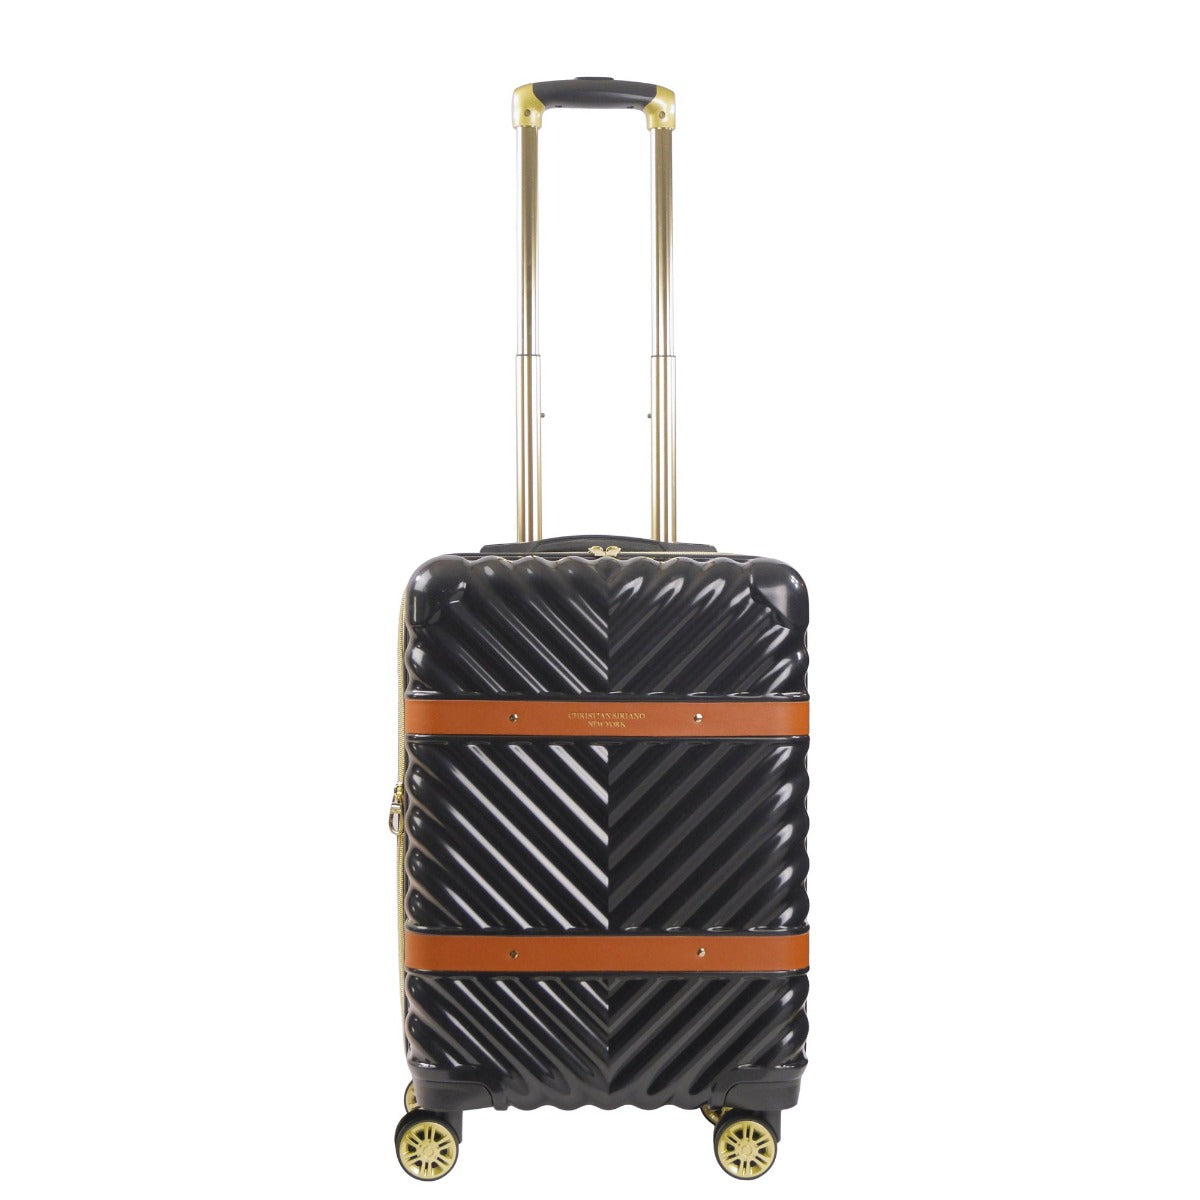 Christian Siriano New York Stella 22 inch hardside spinner luggage black - best carry on suitcase for travelling